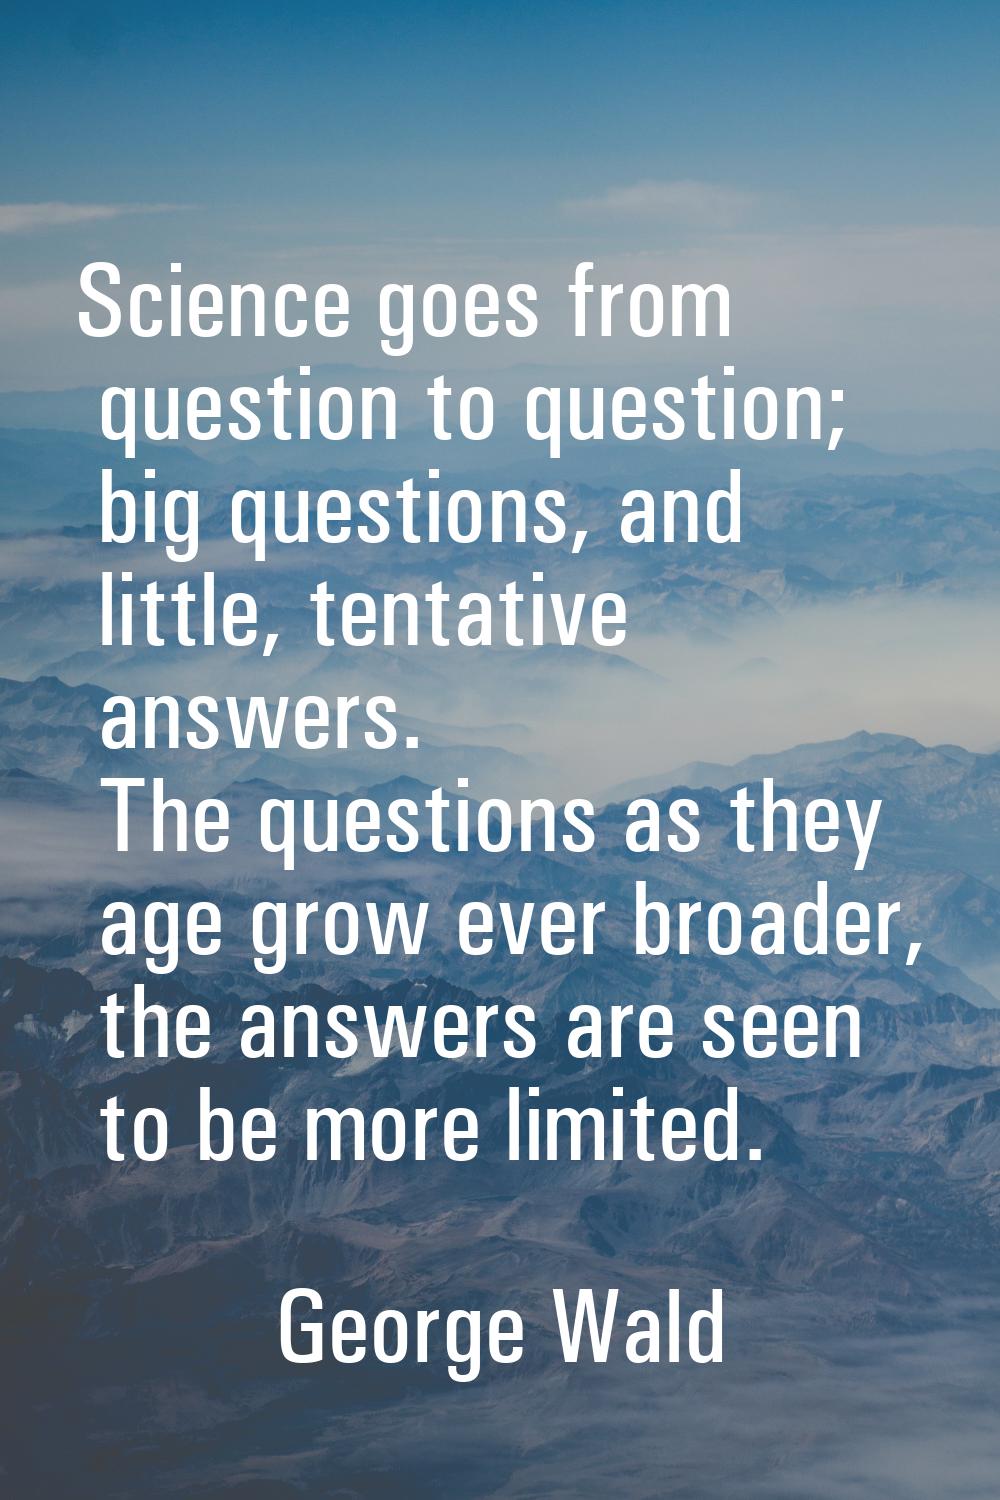 Science goes from question to question; big questions, and little, tentative answers. The questions